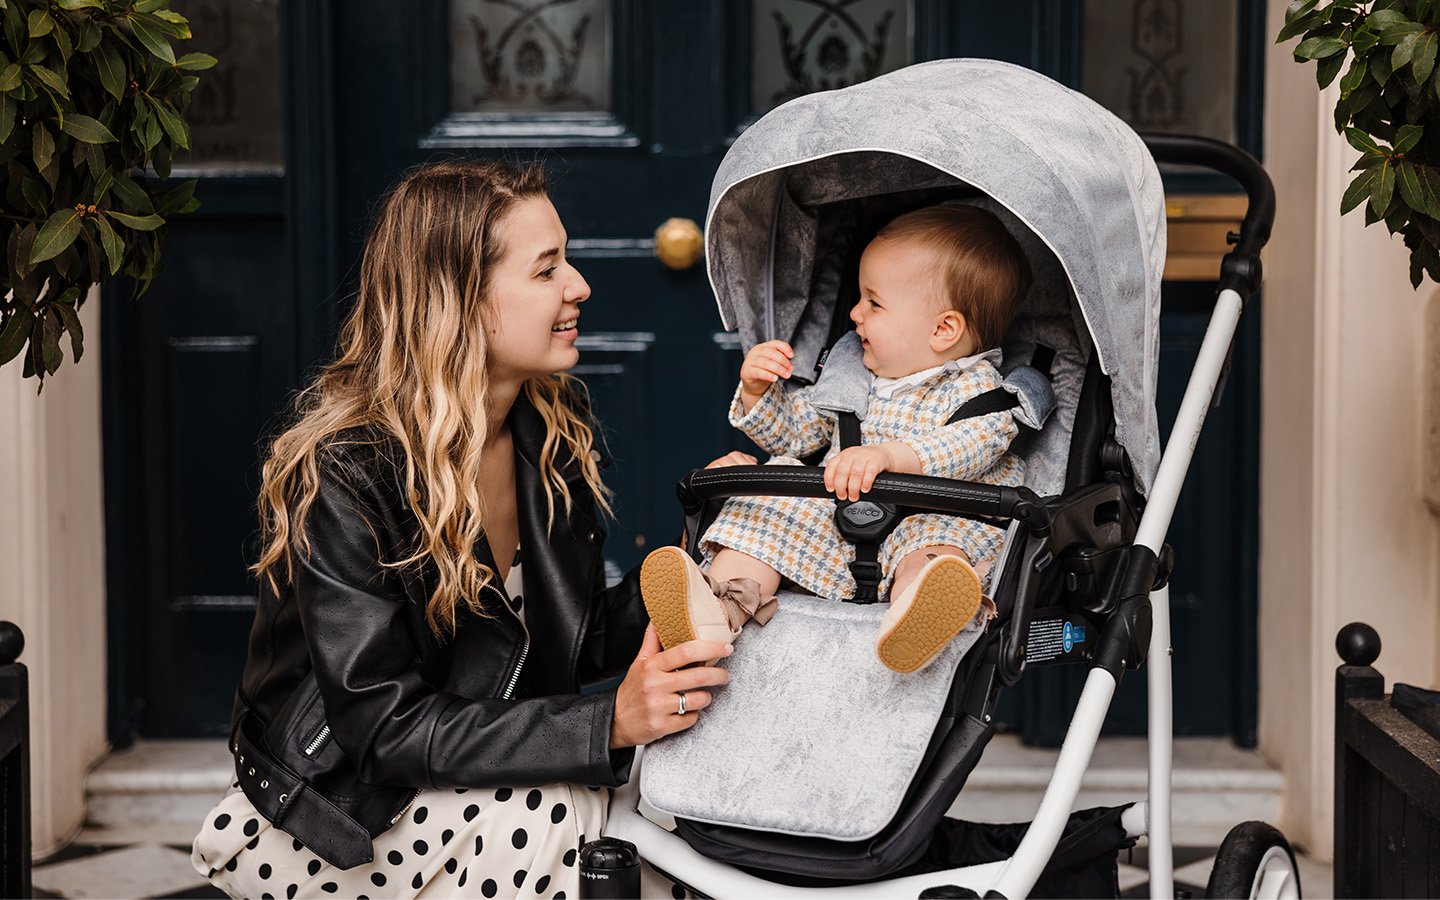 Difference Between Prams, Pushchairs, Strollers, and Buggies